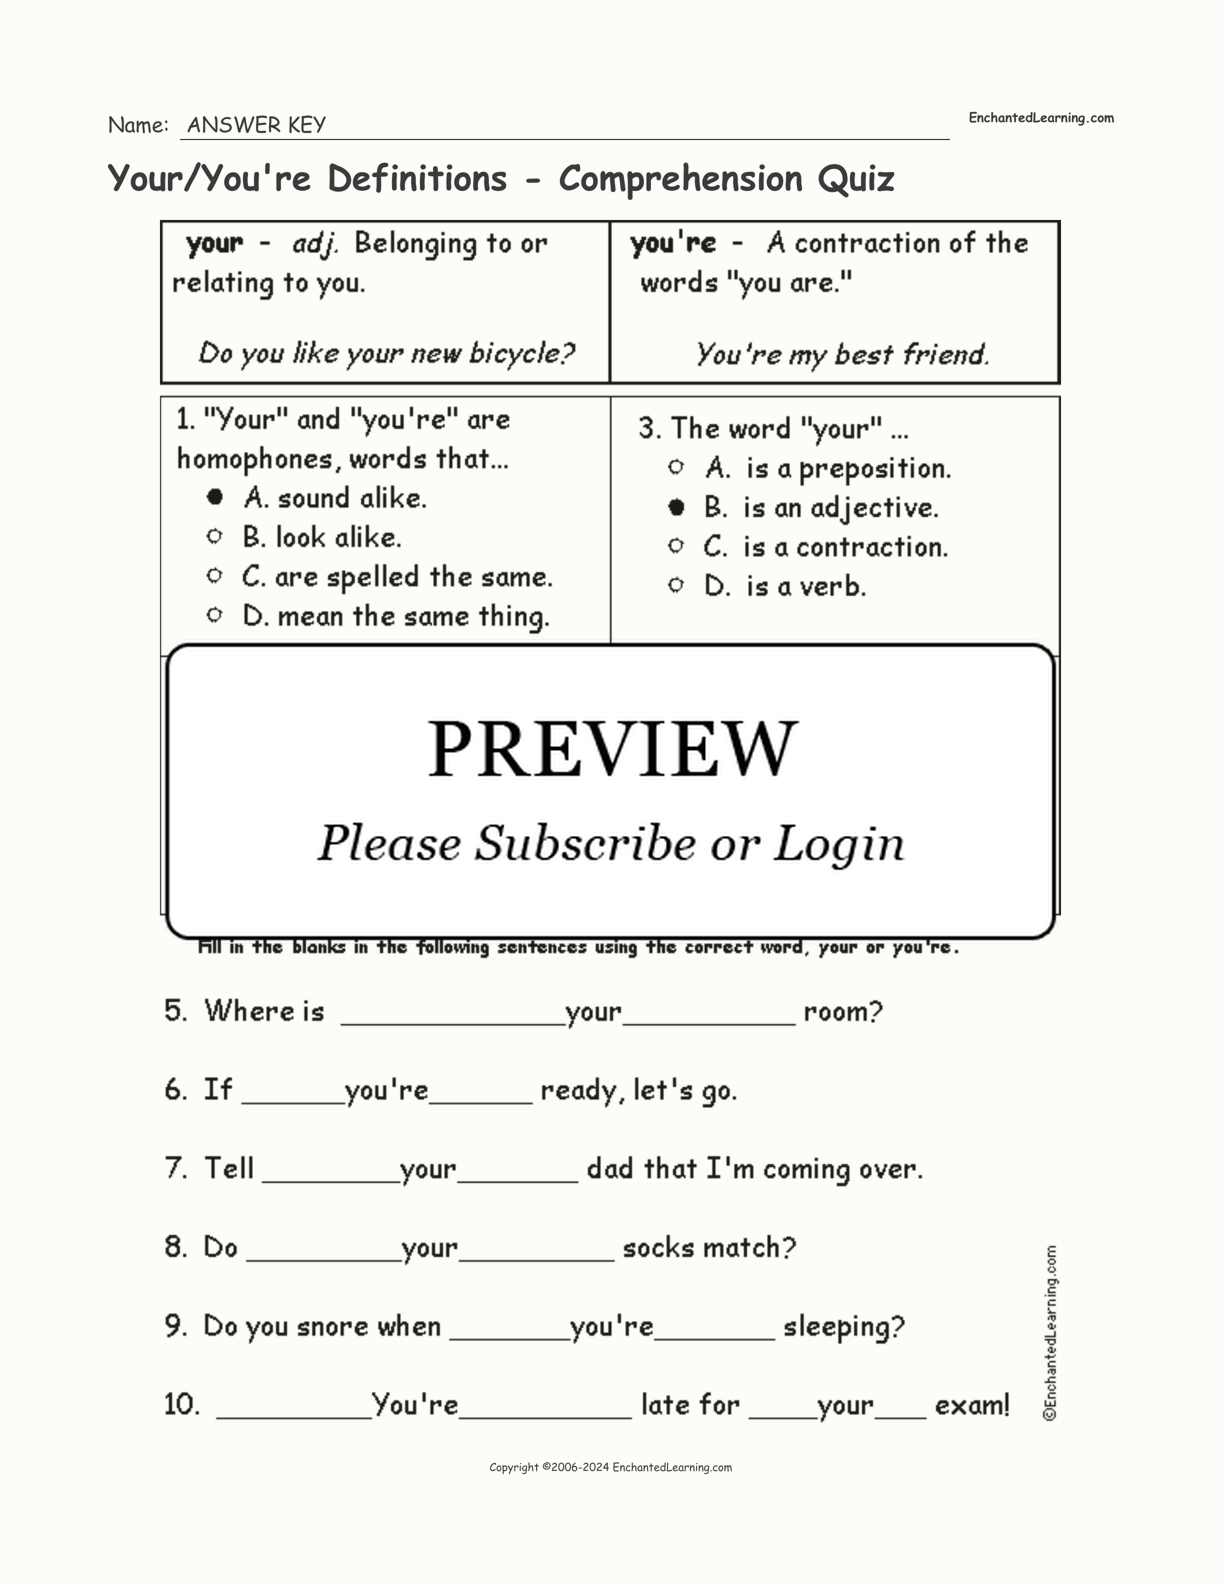 Your/You're Definitions - Comprehension Quiz interactive worksheet page 2